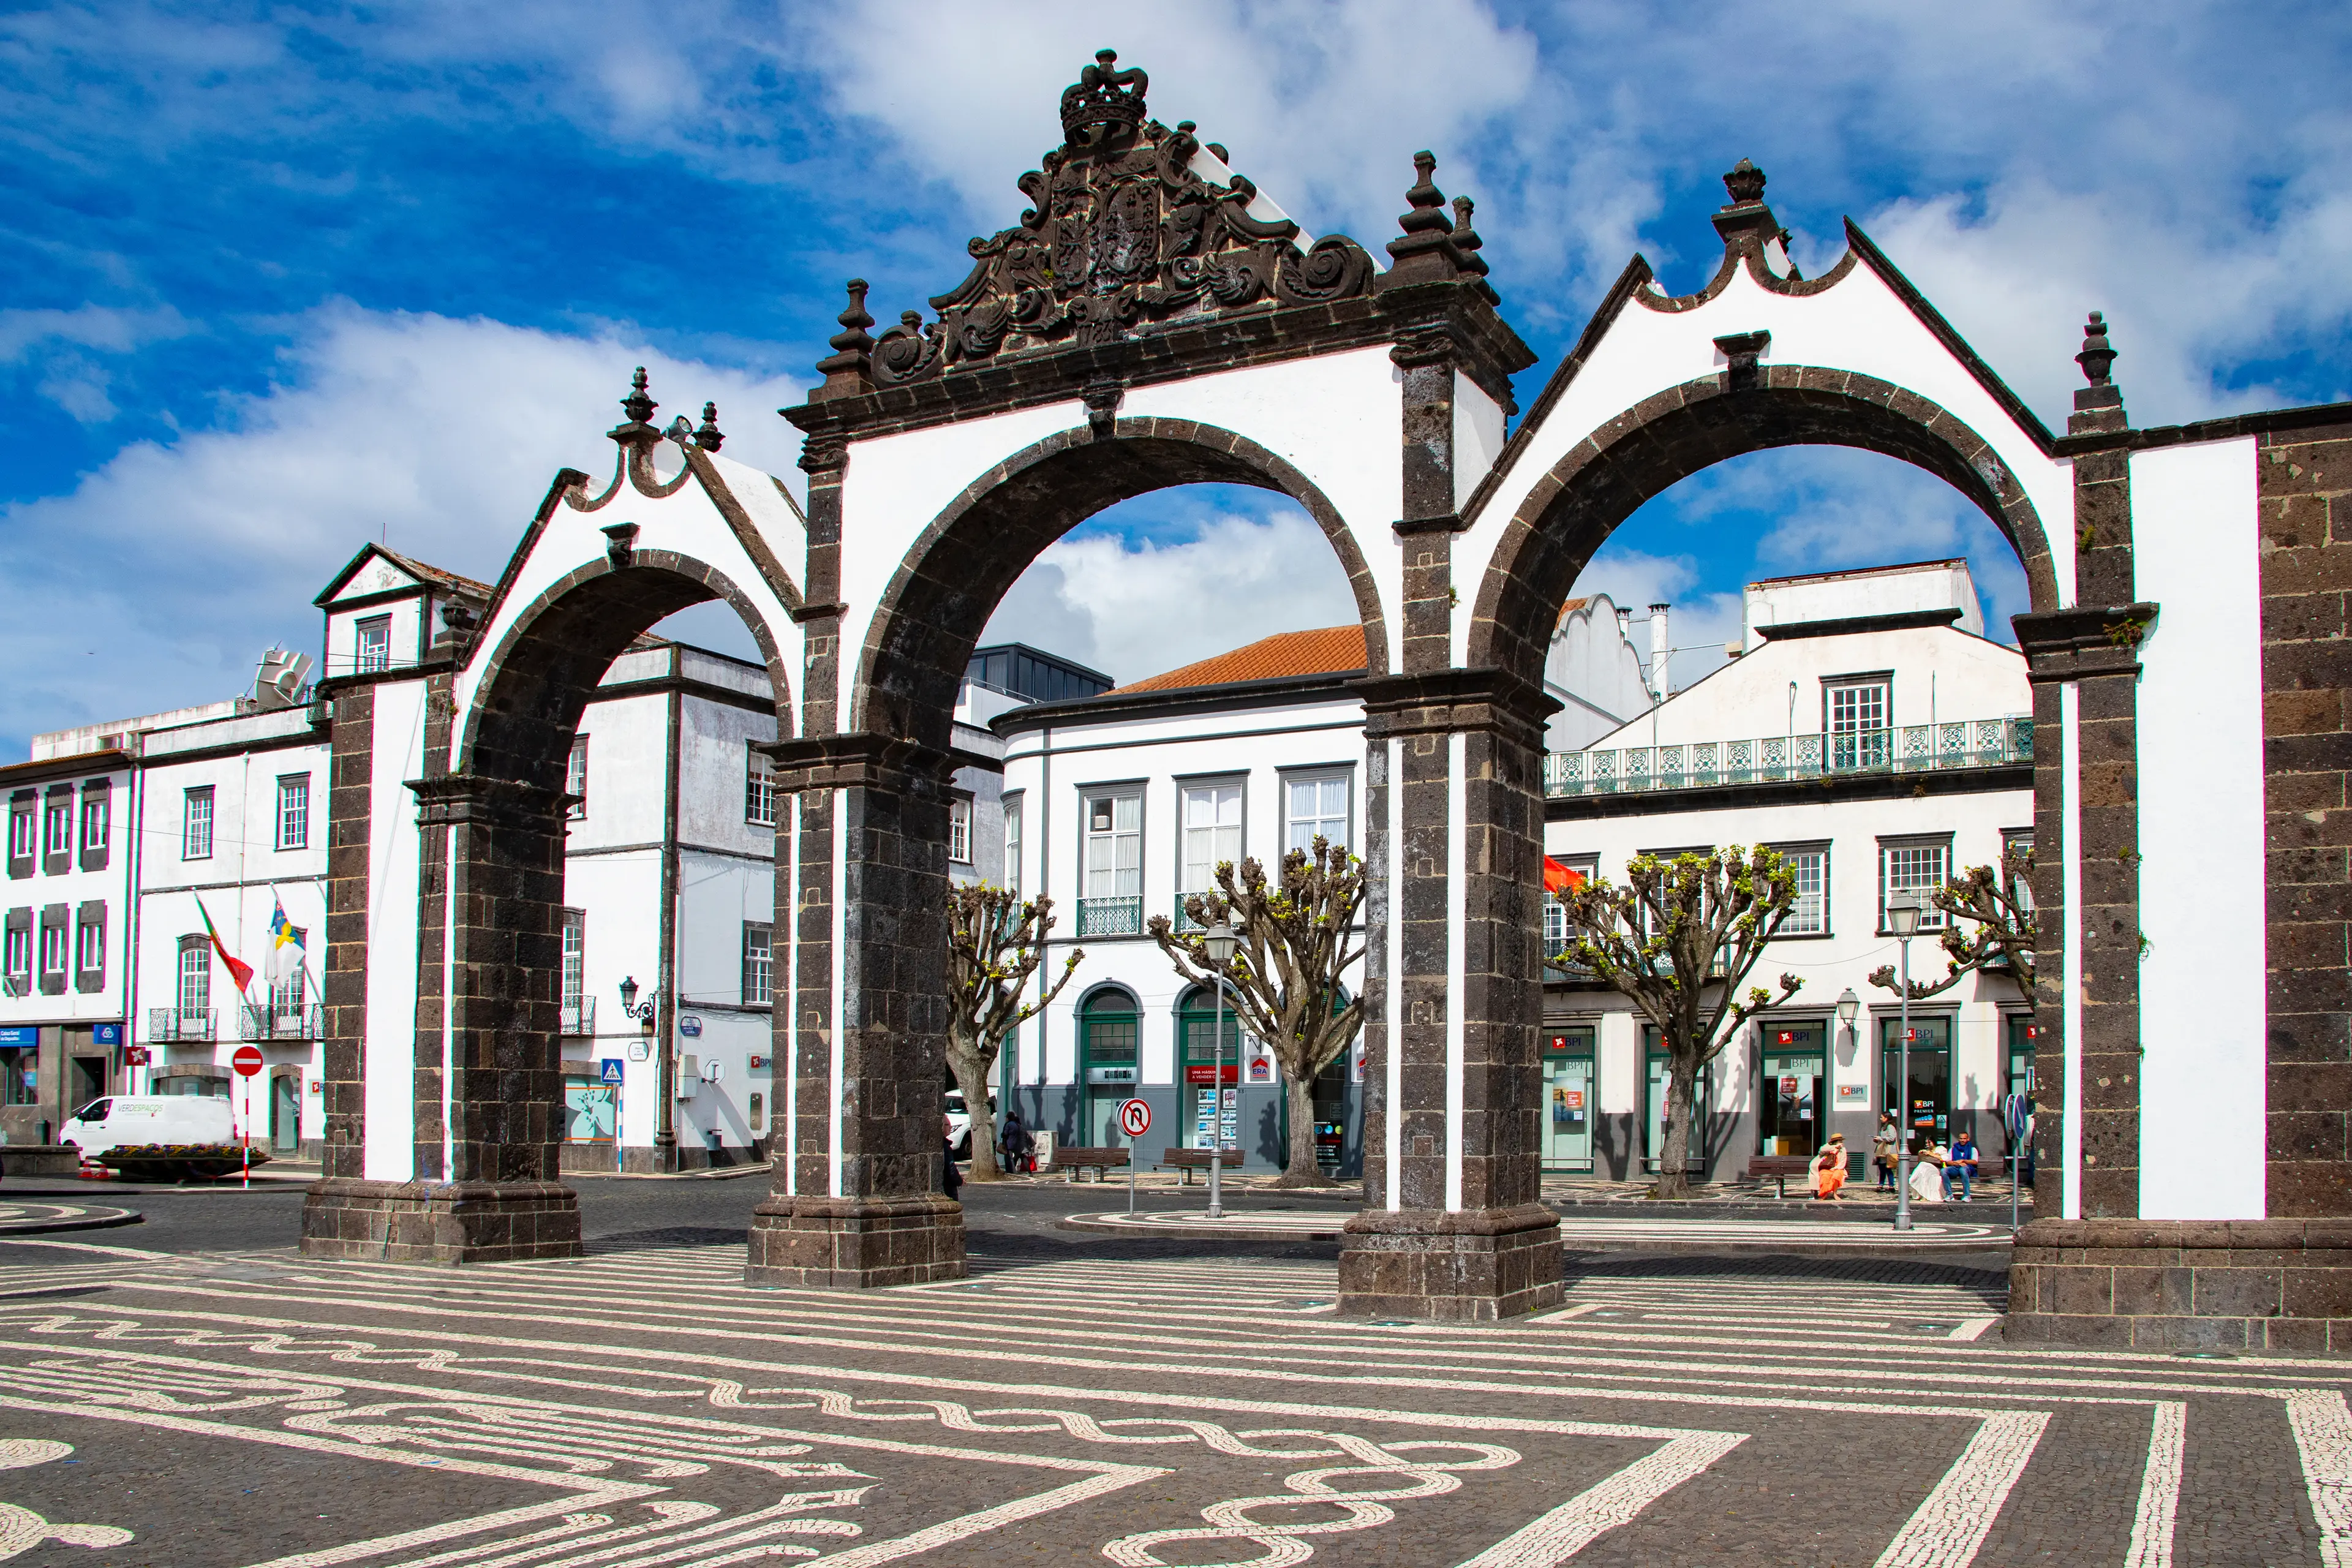 4-Day Azores Shopping & Foodie Adventure with Friends